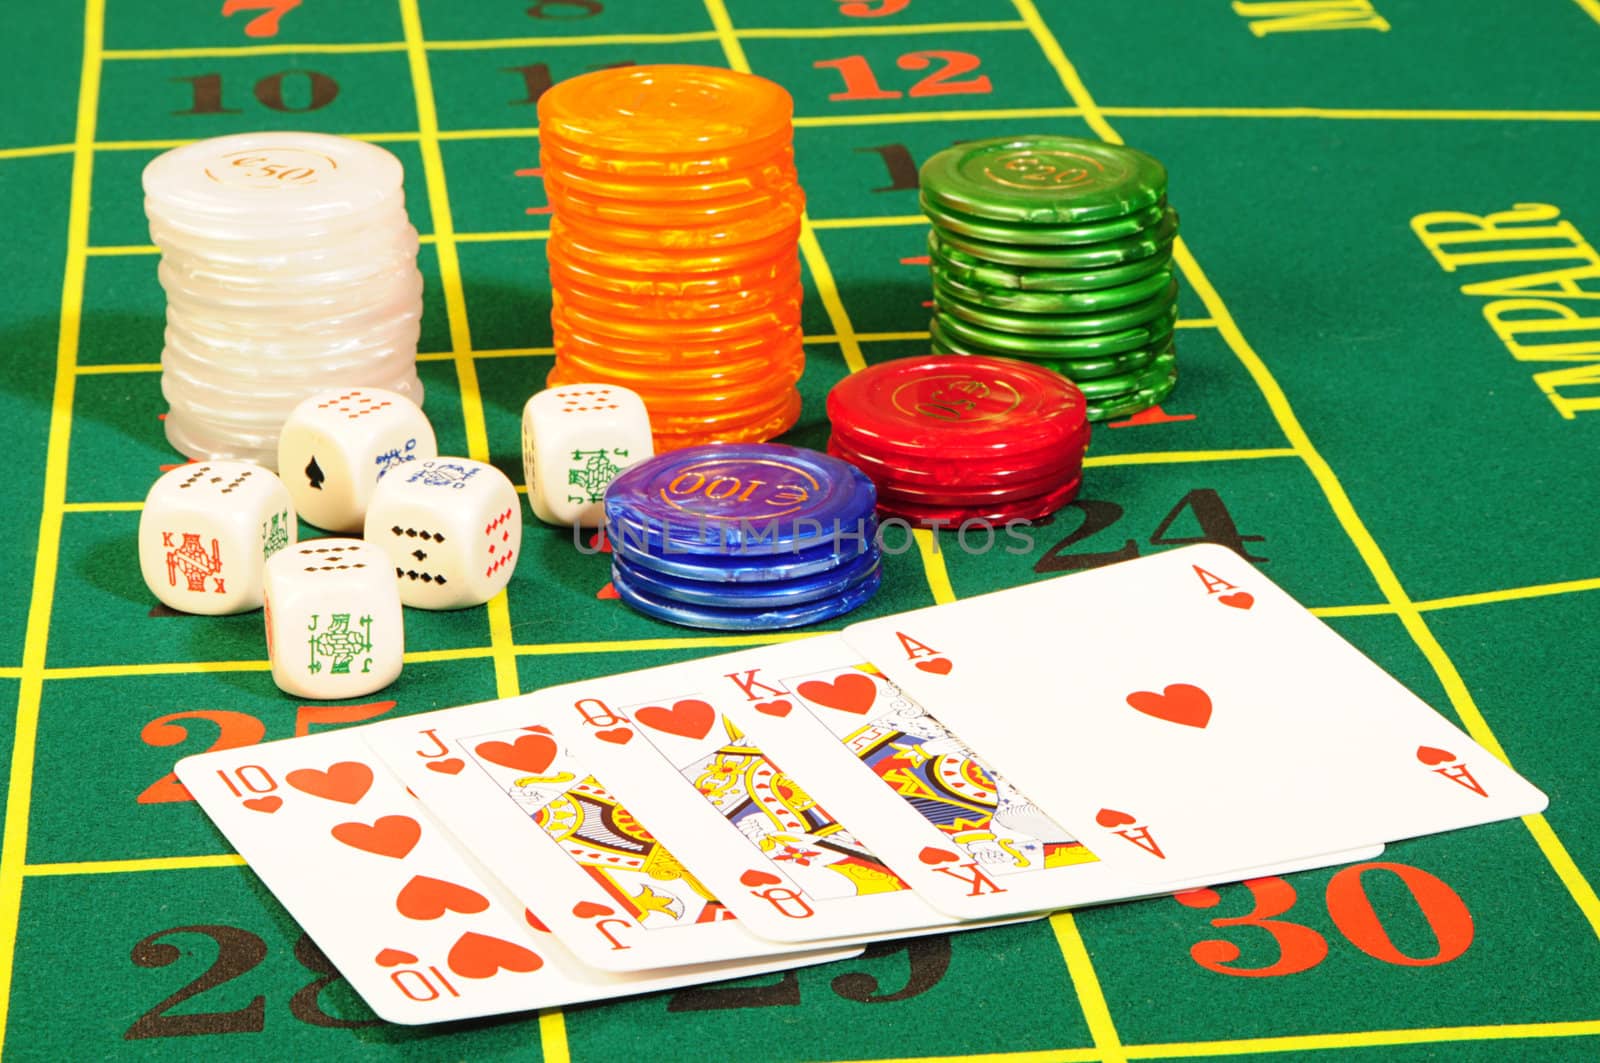 Casino chips,playing bones and royal flash combination on green felt